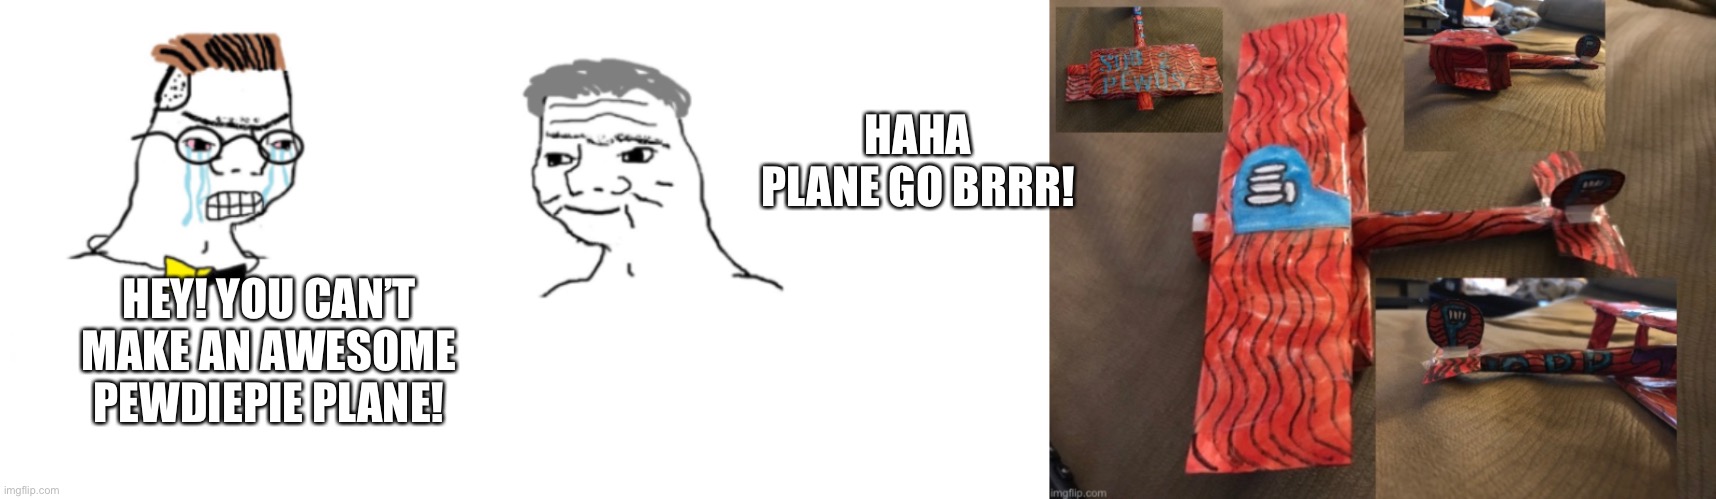 HAHA PLANE GO BRRR! HEY! YOU CAN’T MAKE AN AWESOME PEWDIEPIE PLANE! | image tagged in nooo haha go brrr | made w/ Imgflip meme maker